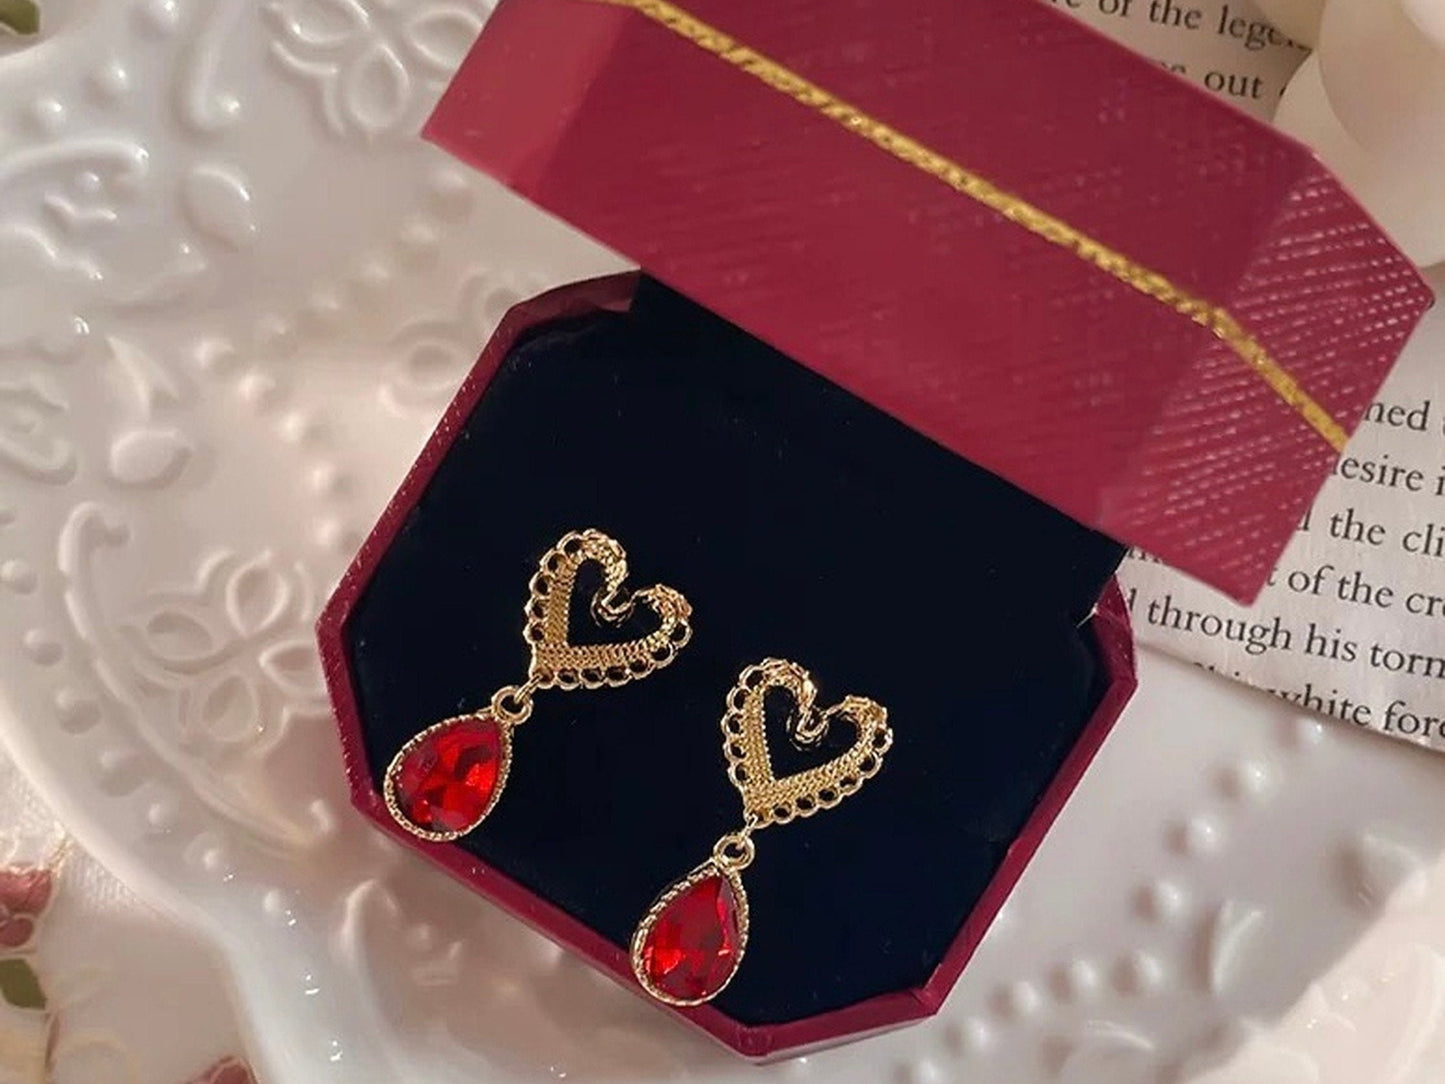 Red Heart Earrings, Romantic Gold Earrings, Red Dangle Earrings, Party Earrings, Gold Lace Earrings, Bridesmaid Anniversary Gift for her